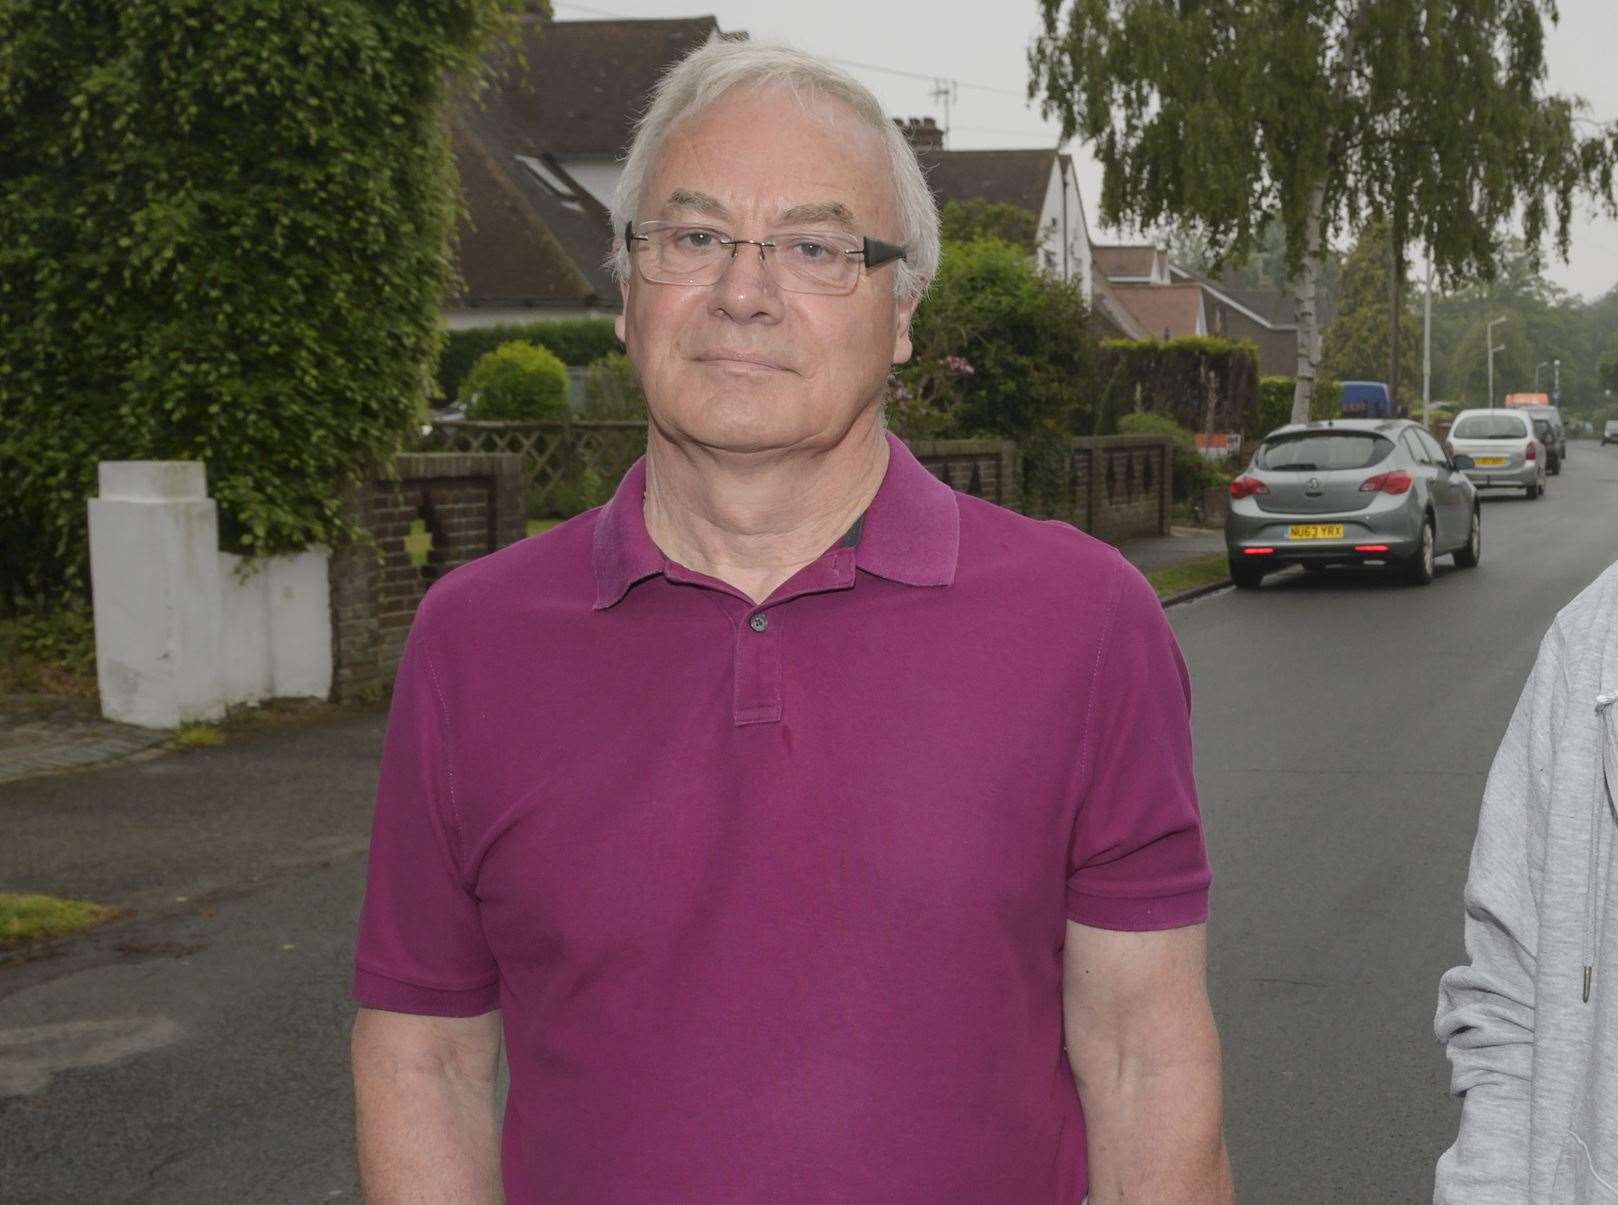 Resident Richard Baker has backed plans for a one-way system on Highsted Road